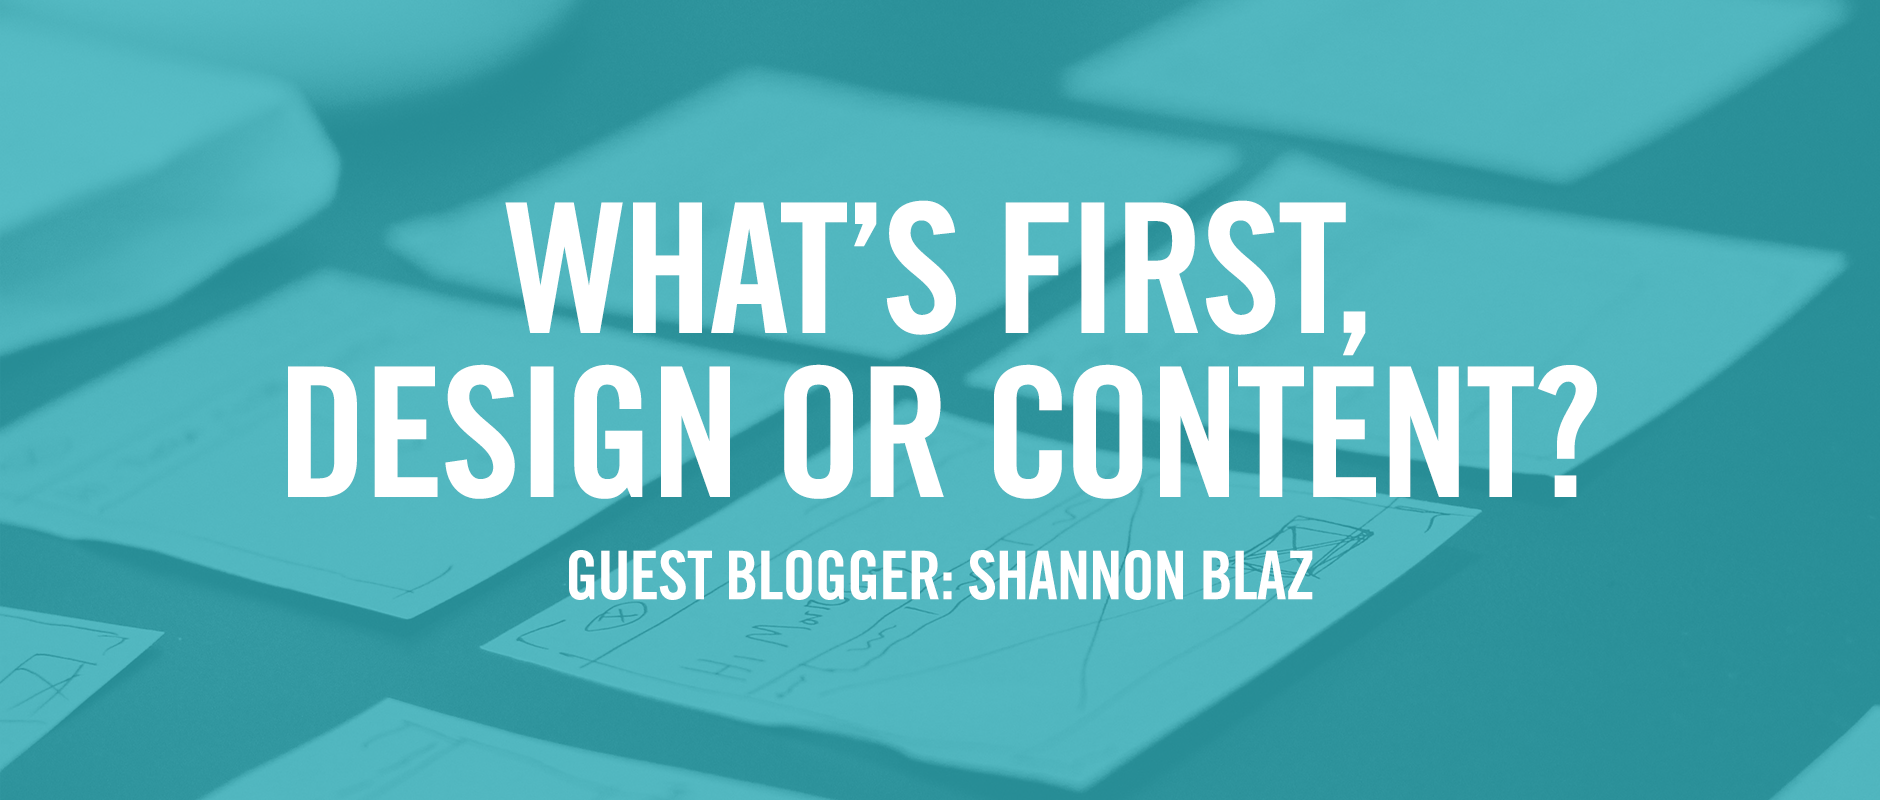 What's First, Design or Content?